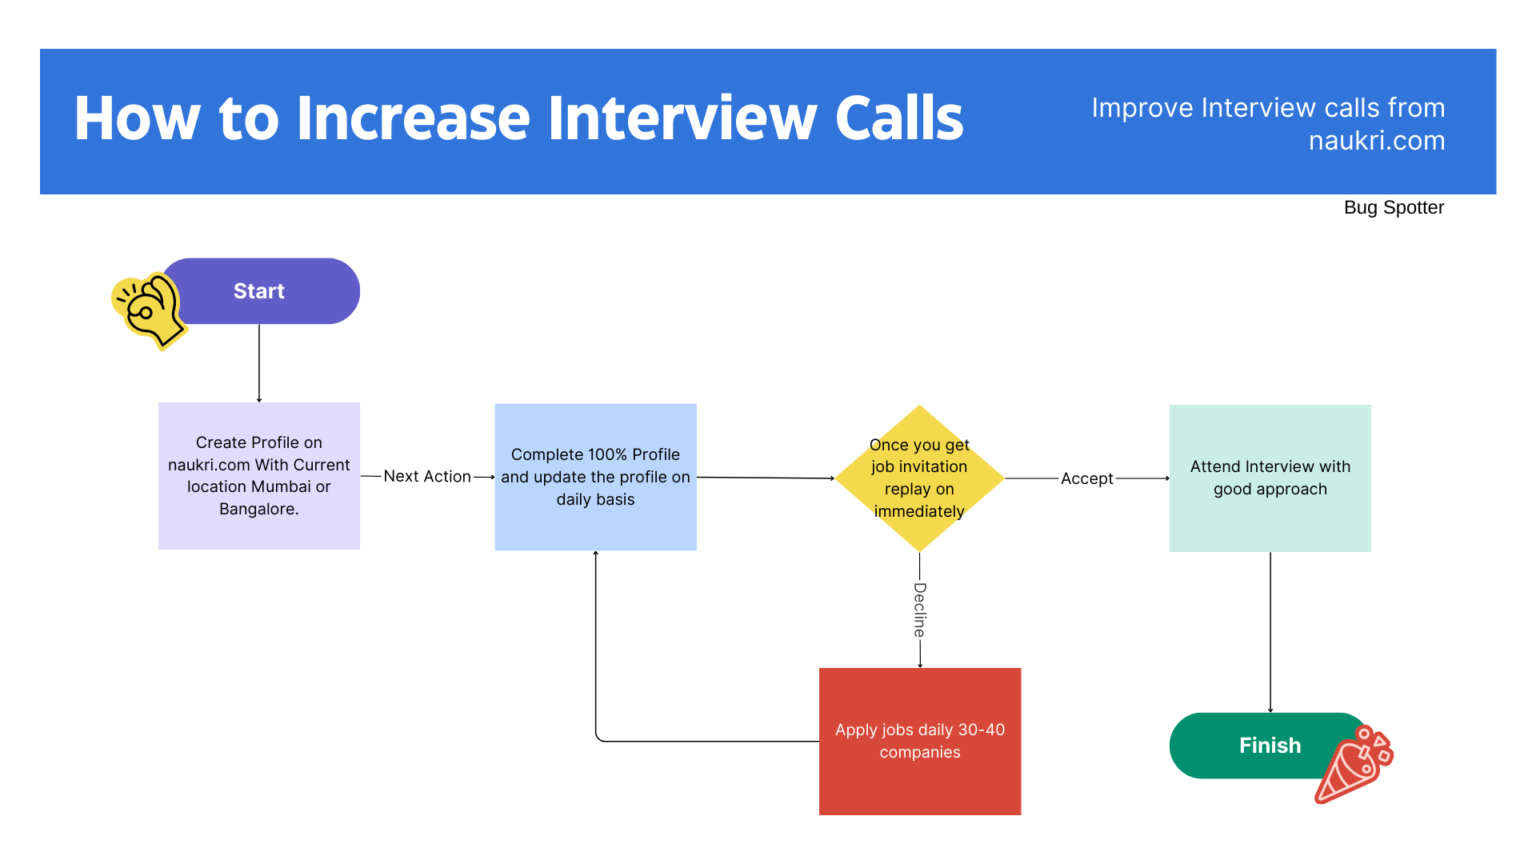 How To Increase Interview Calls From Naukri.com bug spotter